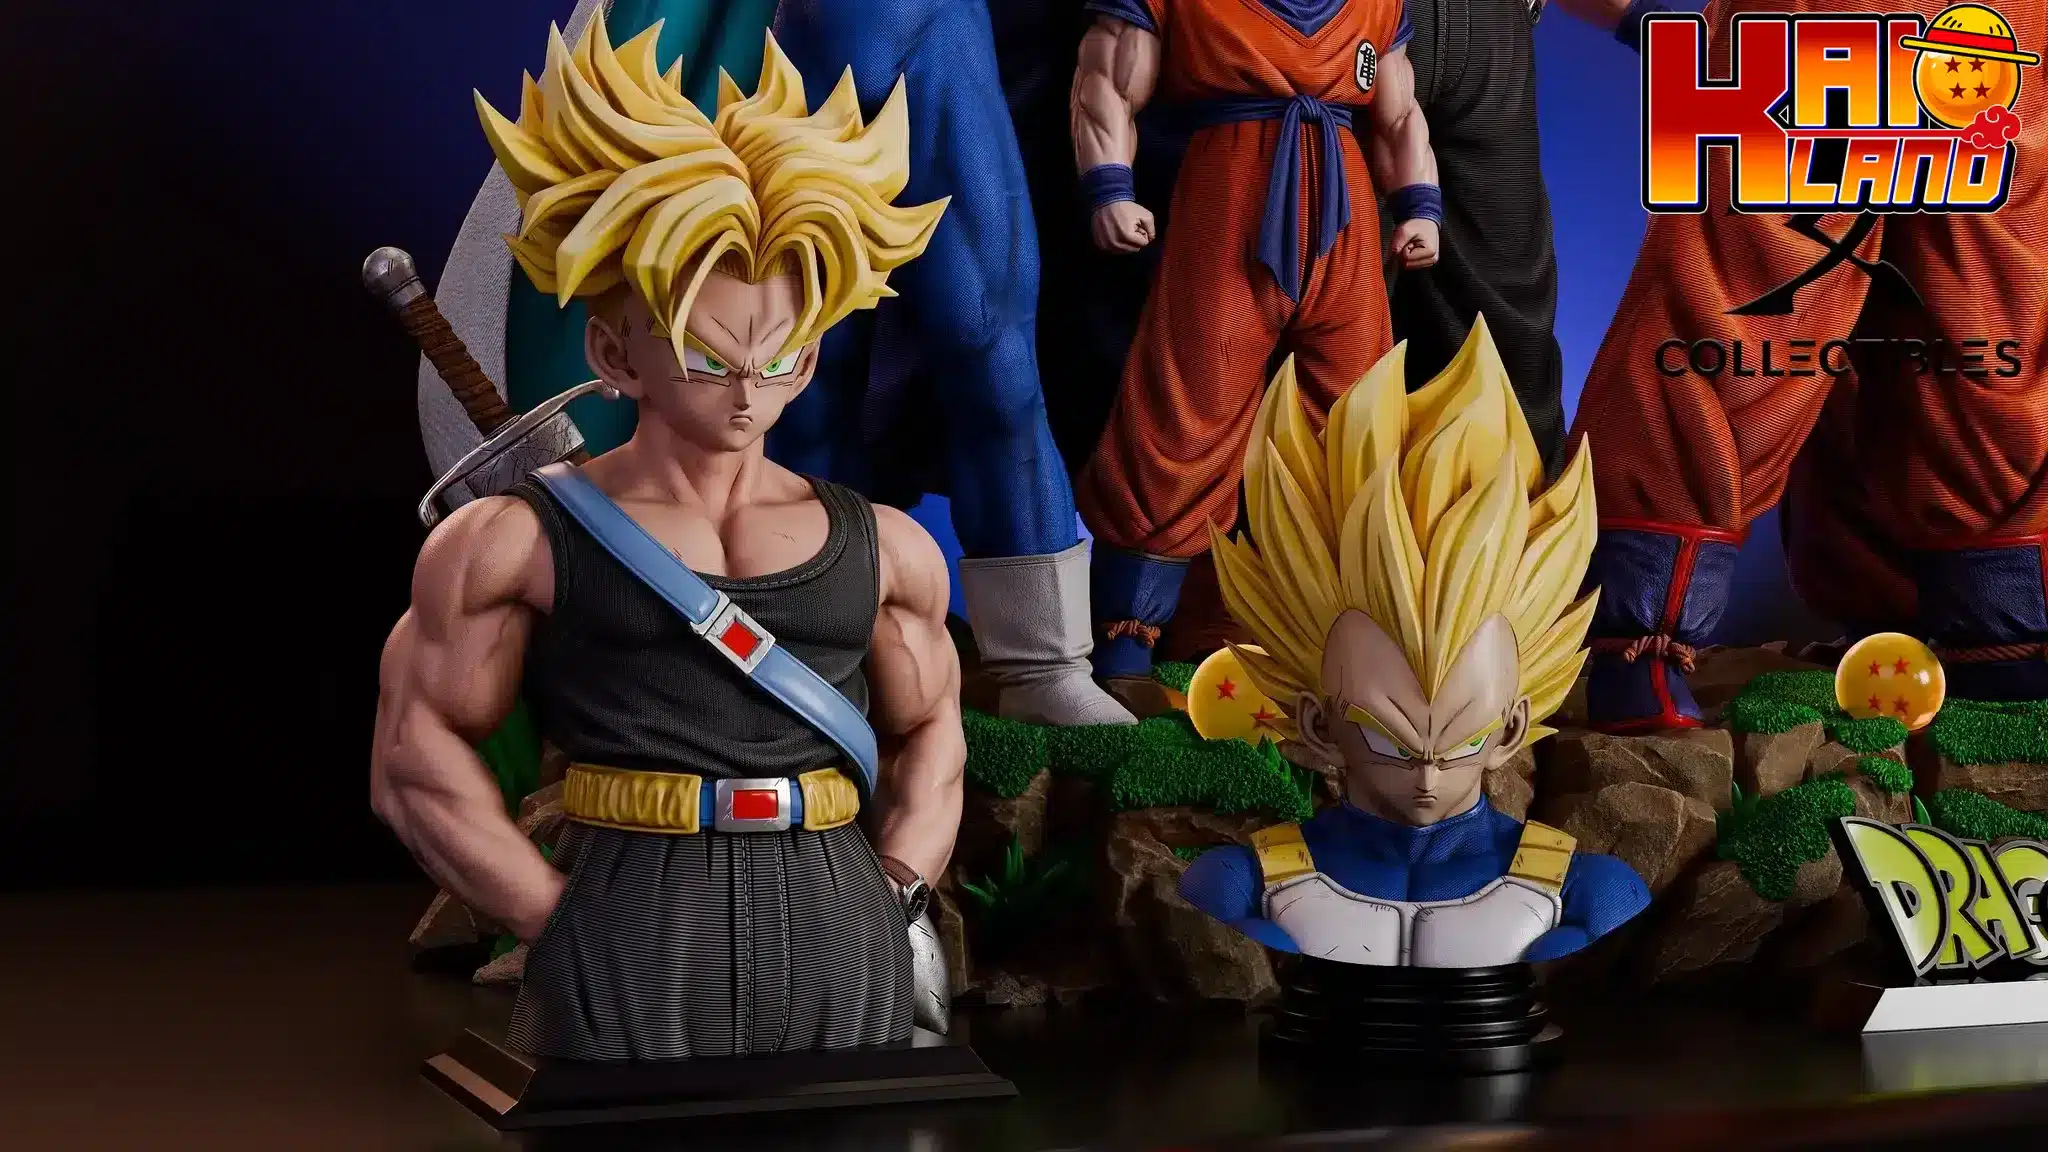 Dragon-Ball-KD-Collectibles-Z-Fighters-Resin-Statue-8-jpg.png